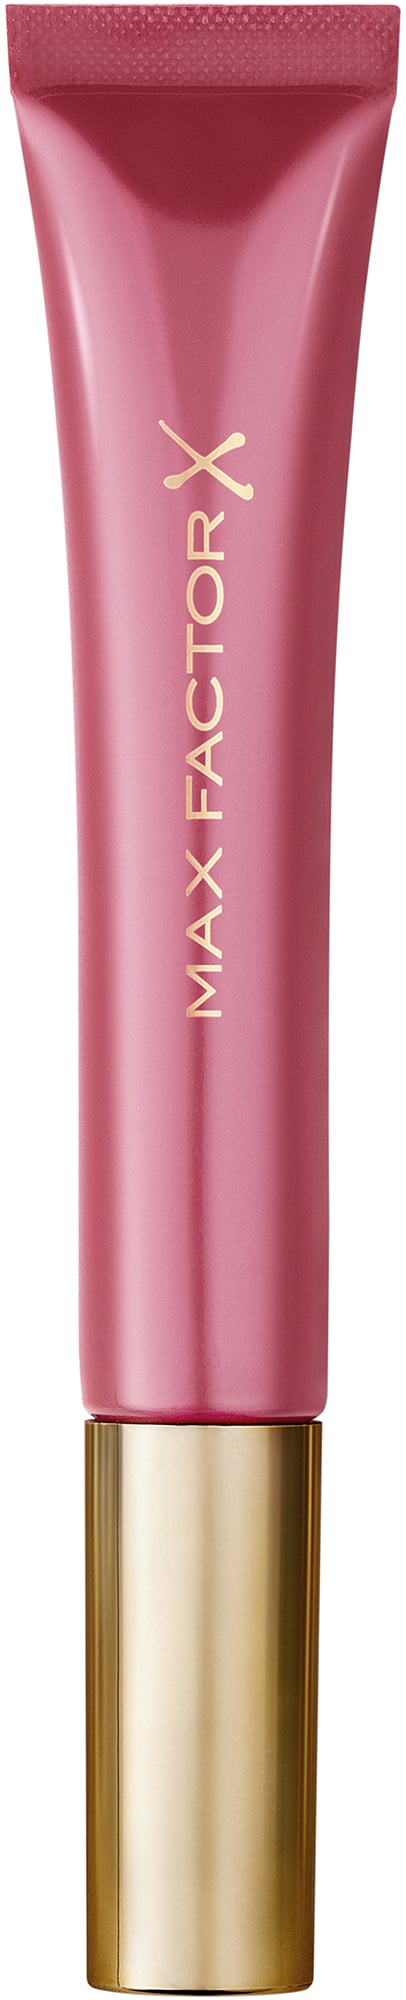 Max Factor Colour Elixir Cushion 030 Majesty Berry 9 ml